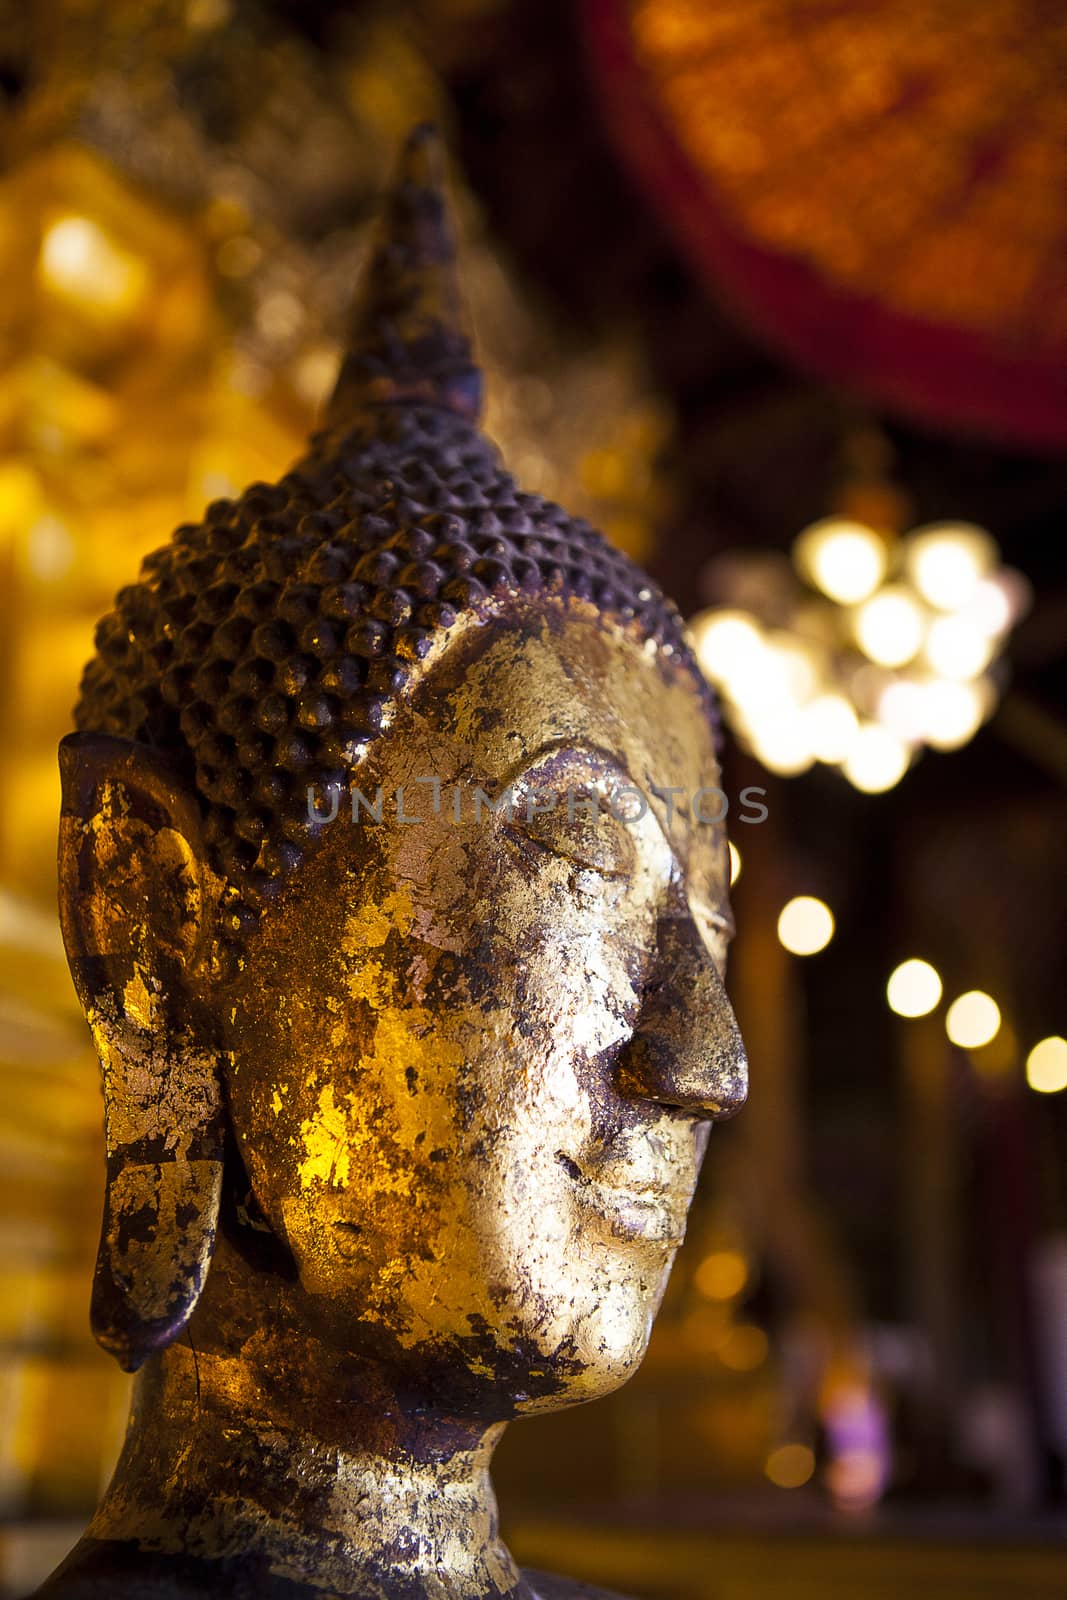 Buddha is revered by Buddhists. To commemorate the Buddha's teachings as always.